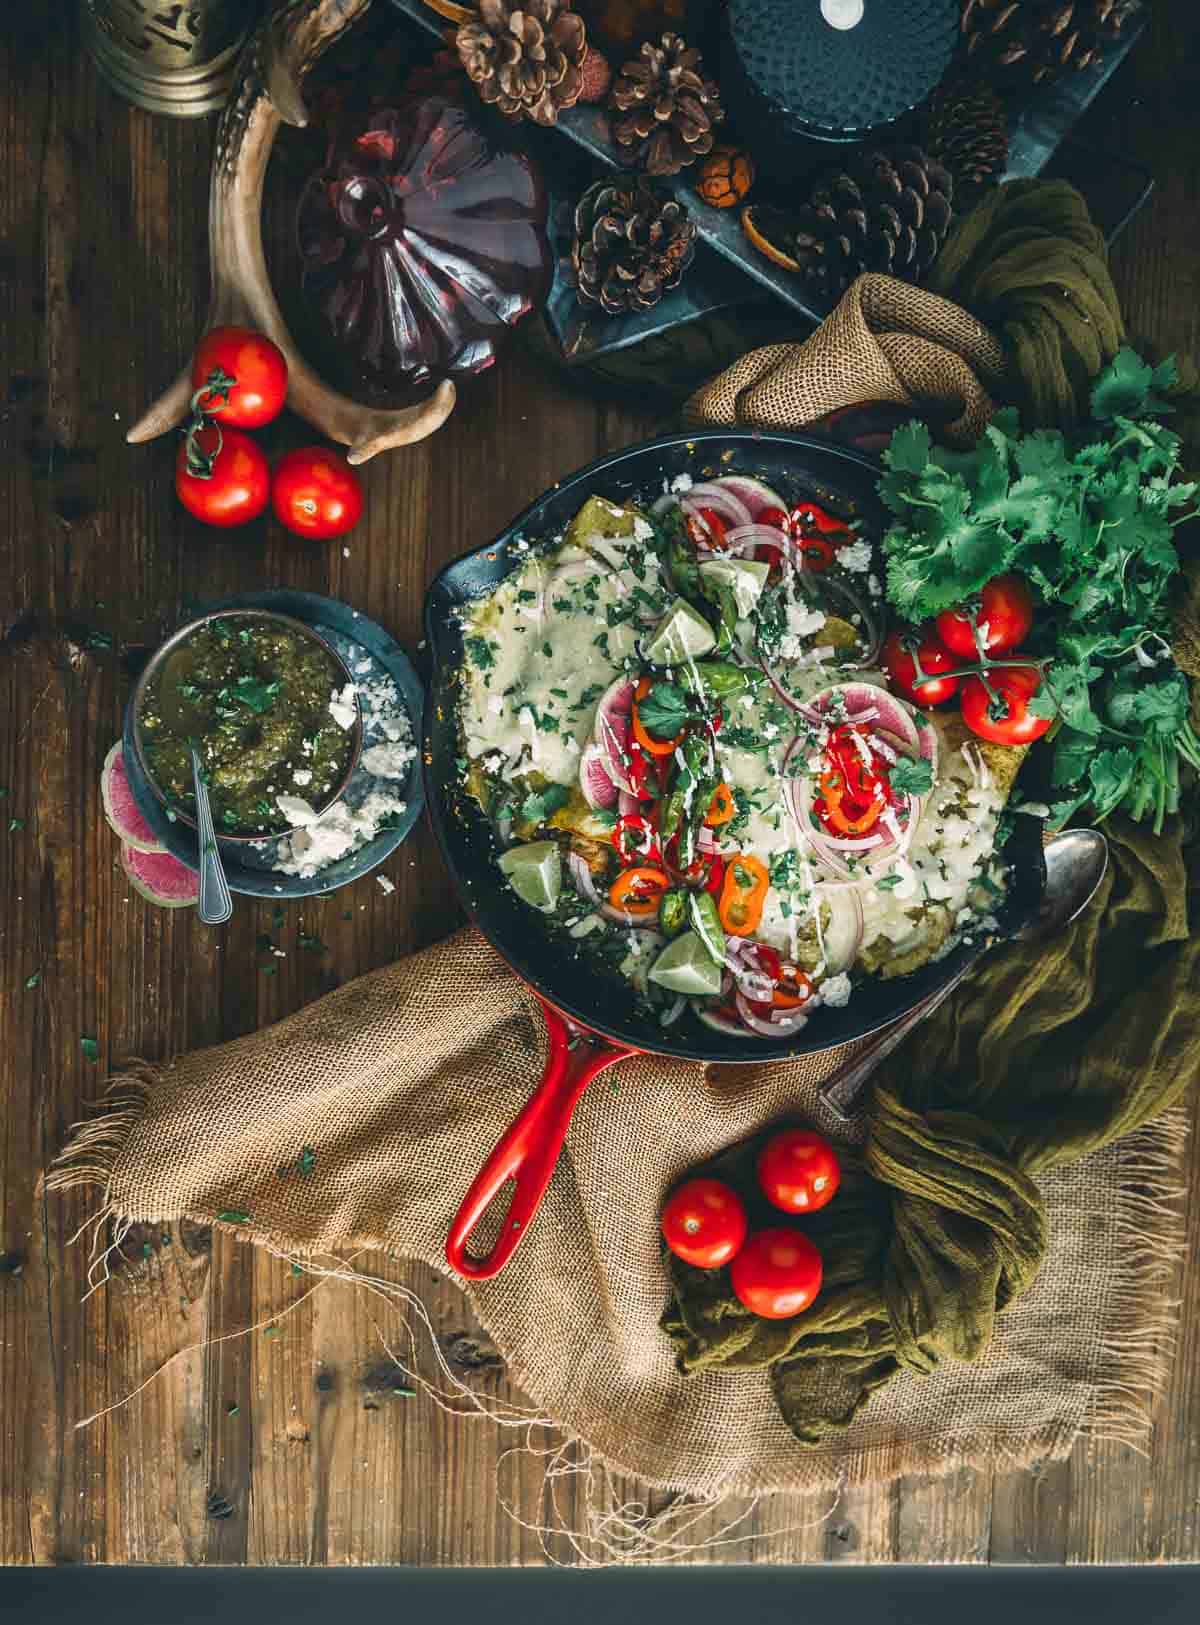 A skillet filled with enchiladas verdes and herbs on a wooden table.